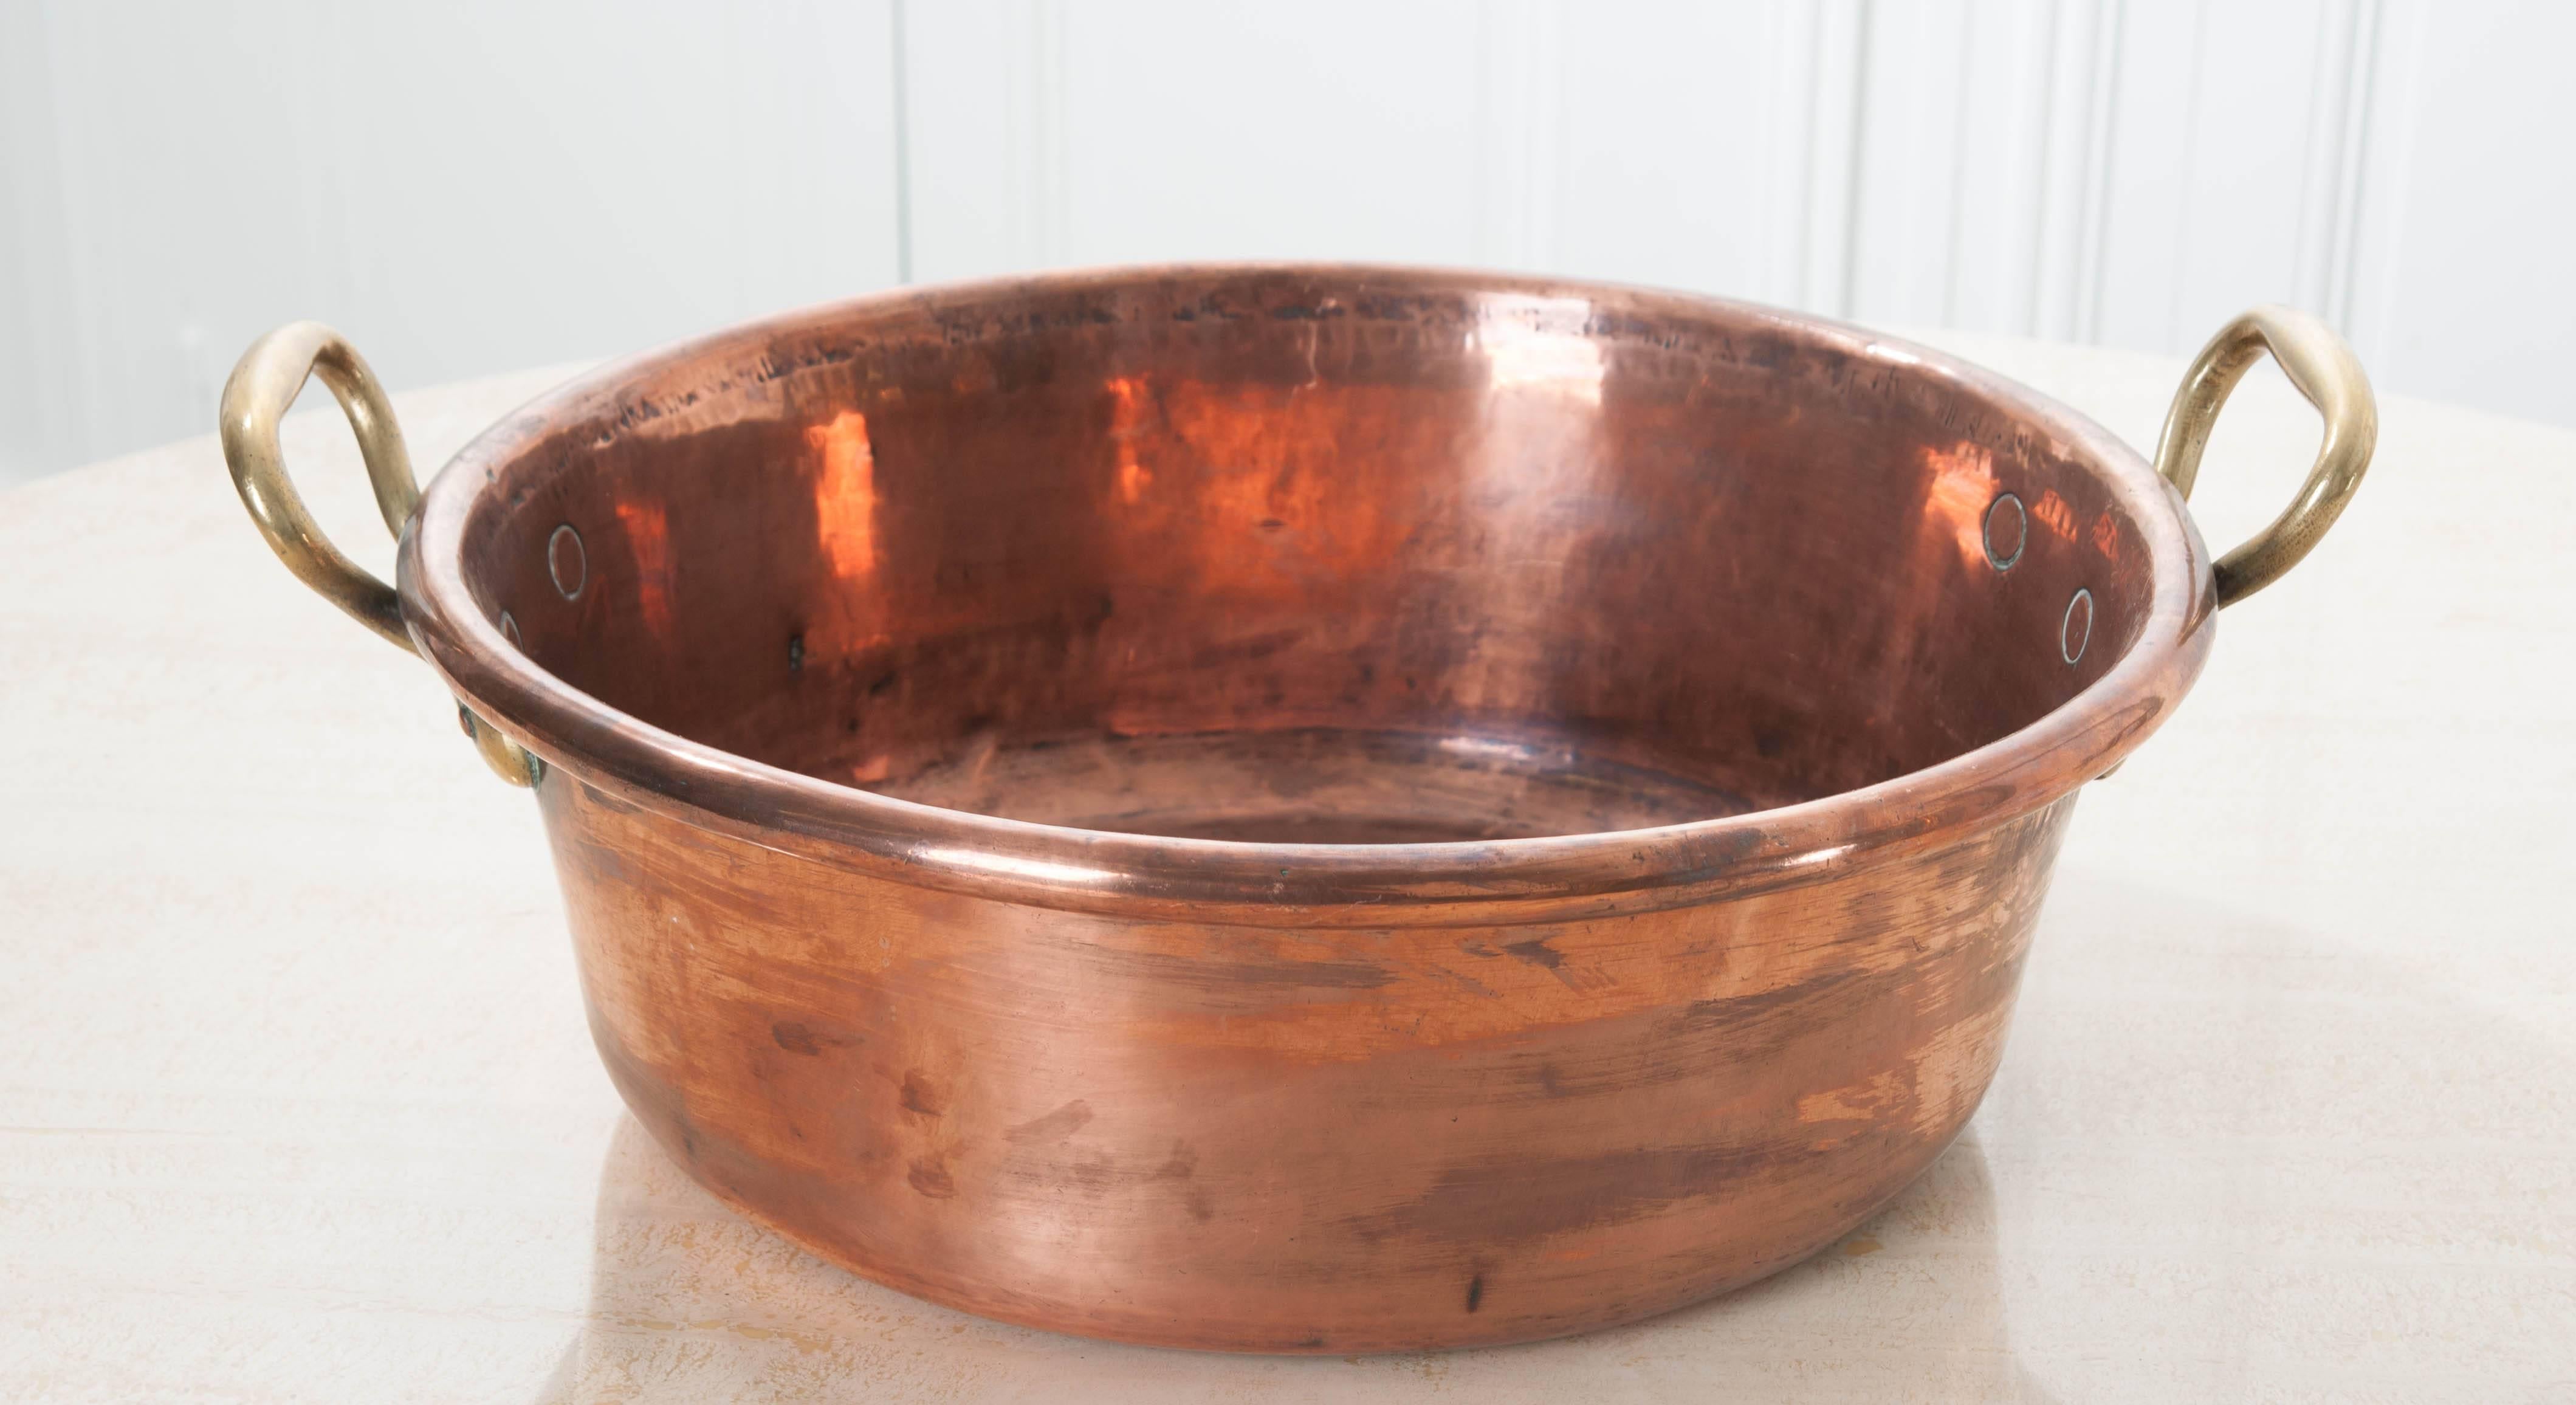 A beautiful, large copper cauldron with brass handles from the early part of the 20th century. The cauldron gleams, as the recently polished copper reflects light beautifully, creating a metallic luster that is warm and pleasant. Two brass loops